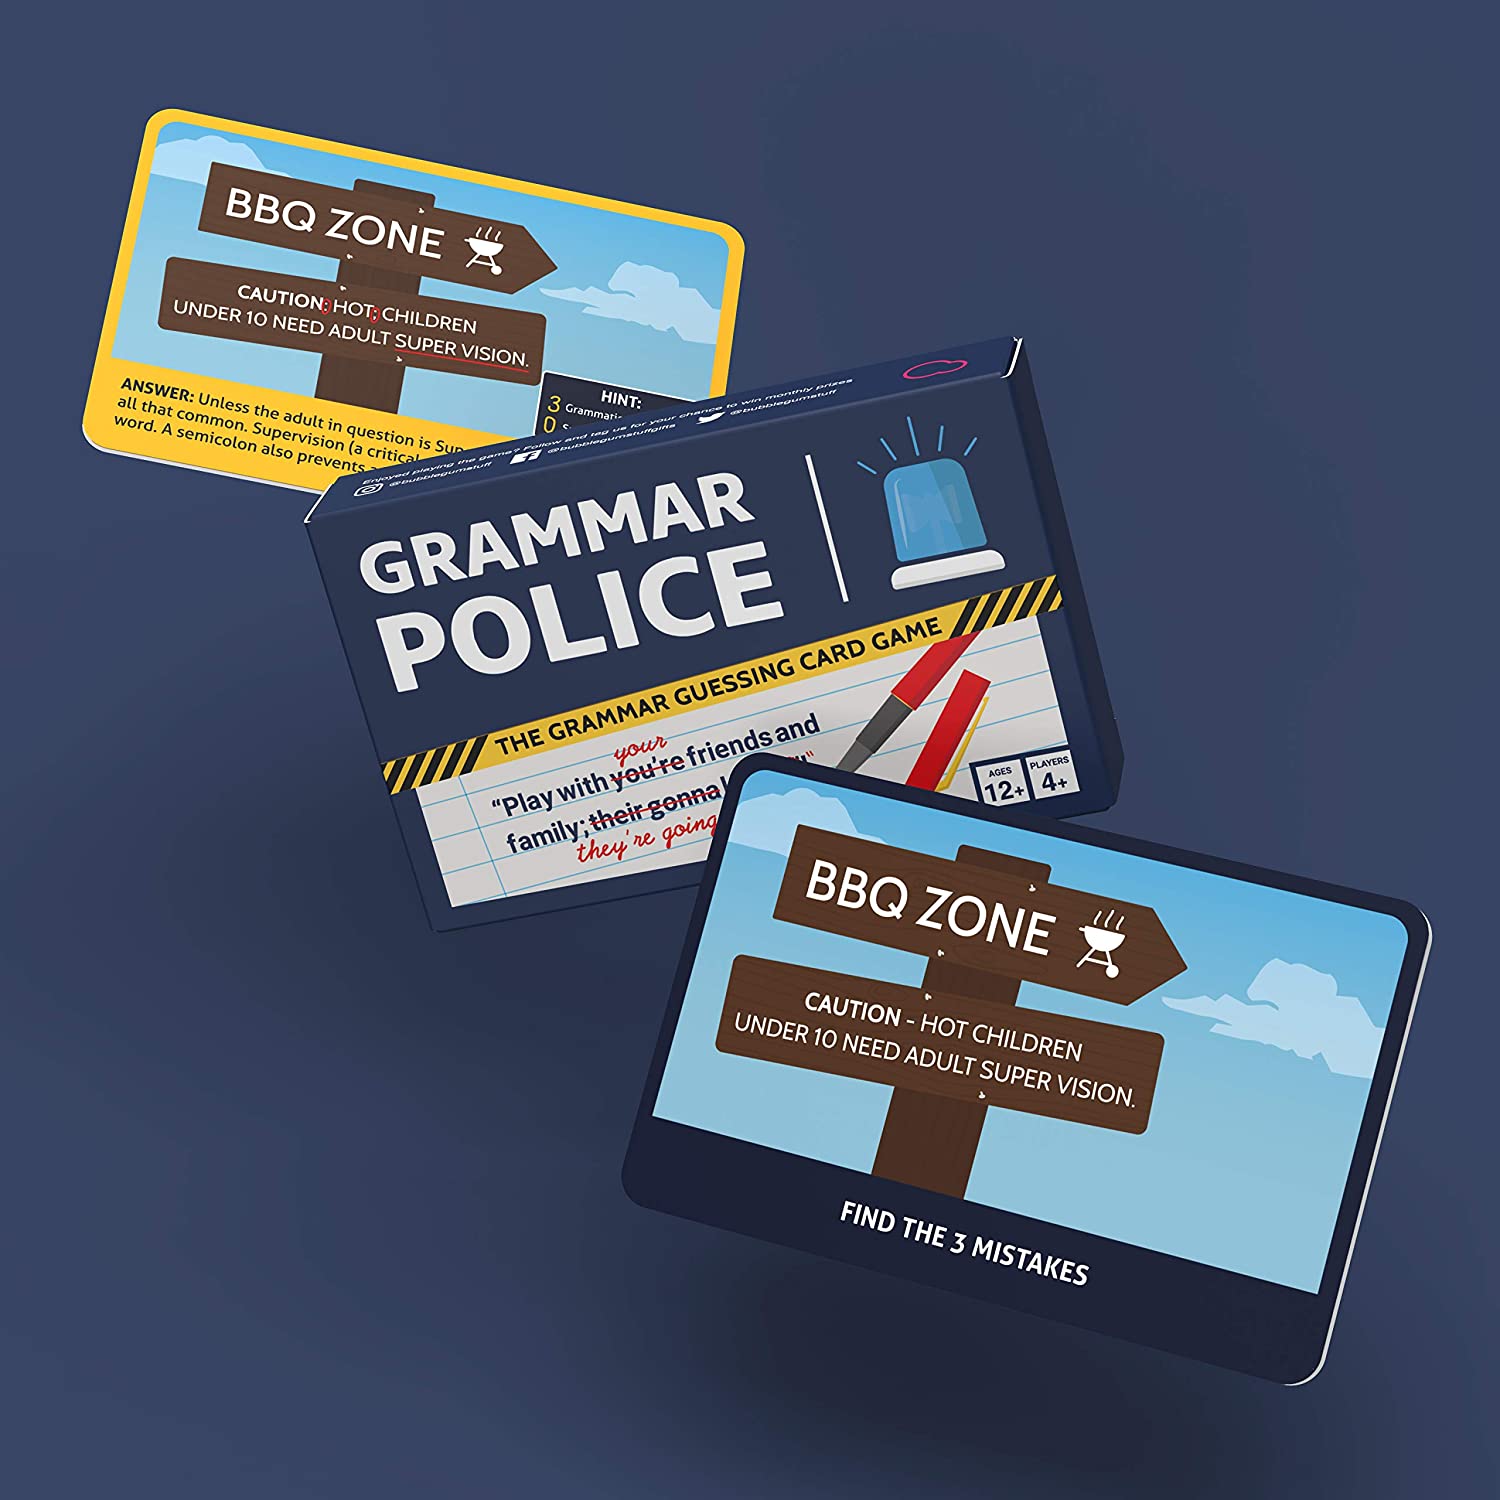 There&#8217;s a new &#8216;grammar police&#8217; card game you can play with your mates, The Manc